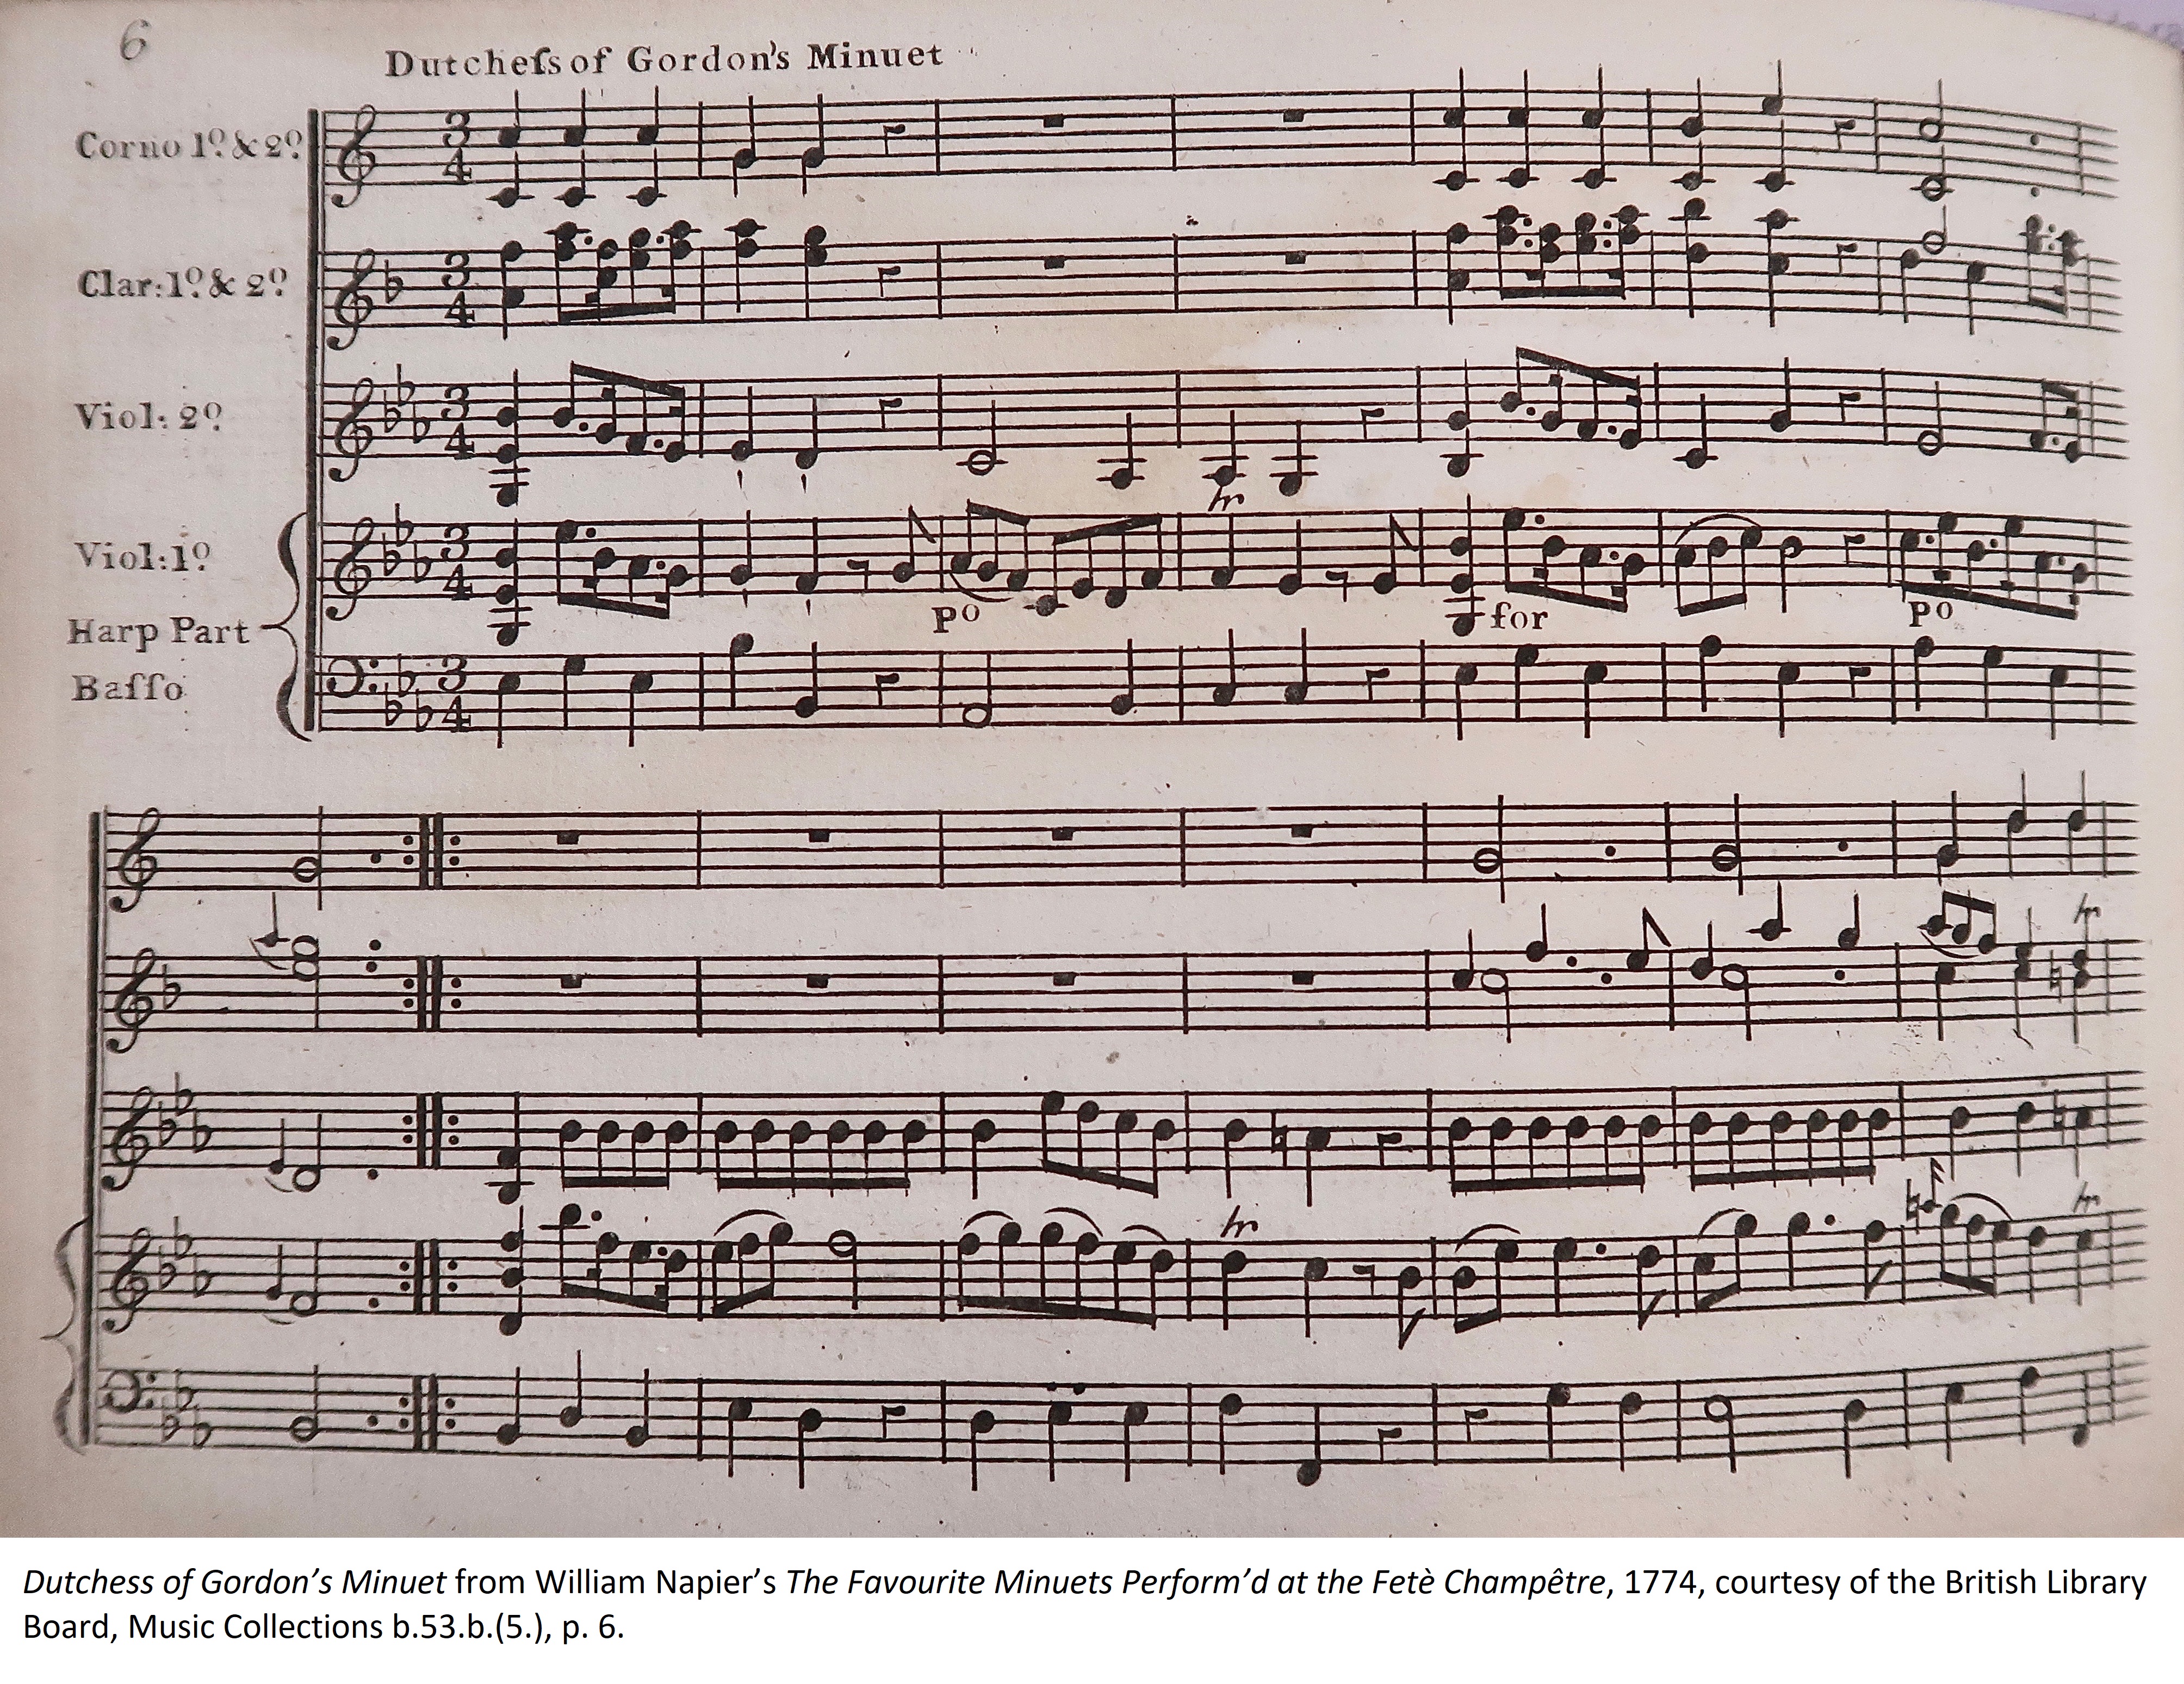 Dutchess of Gordon’s Minuet from William Napier’s The Favourite Minuets Perform’d at the Fetè Champêtre, 1774, courtesy of the British Library Board, Music Collections b.53.b.(5.), p. 6.